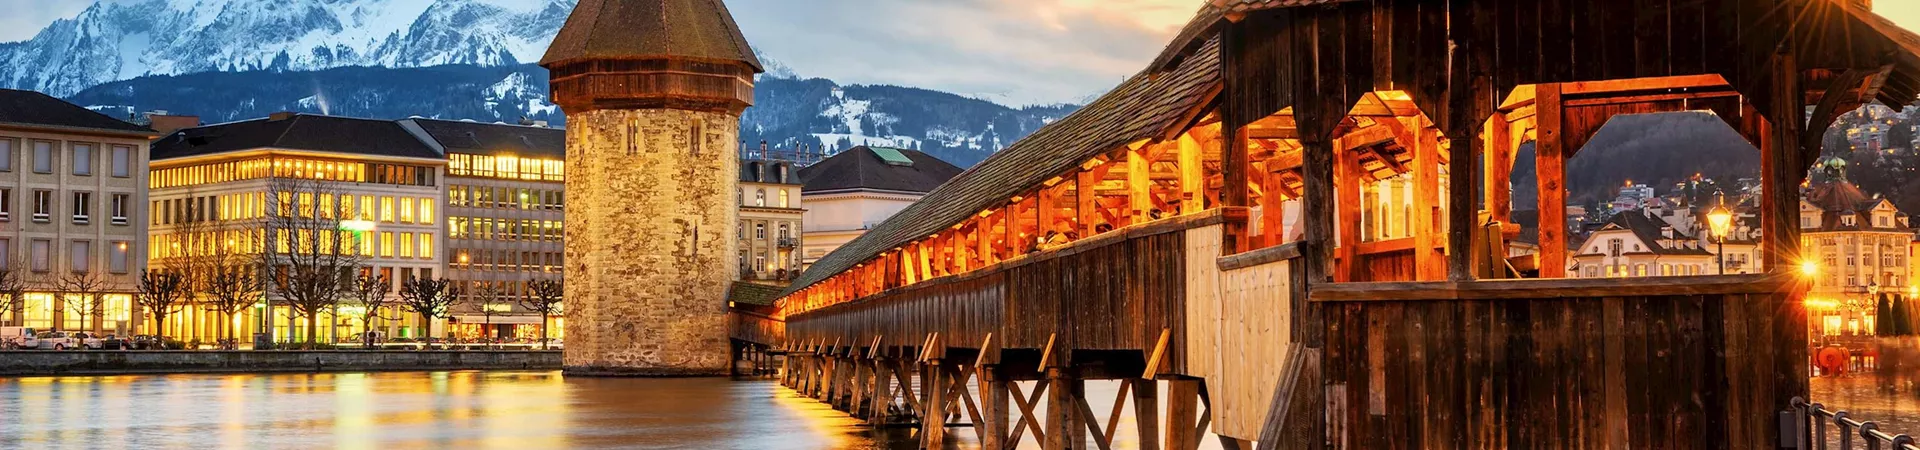 A bridge in Lucerne lit with warm light. A backdrop of snowy mountains.